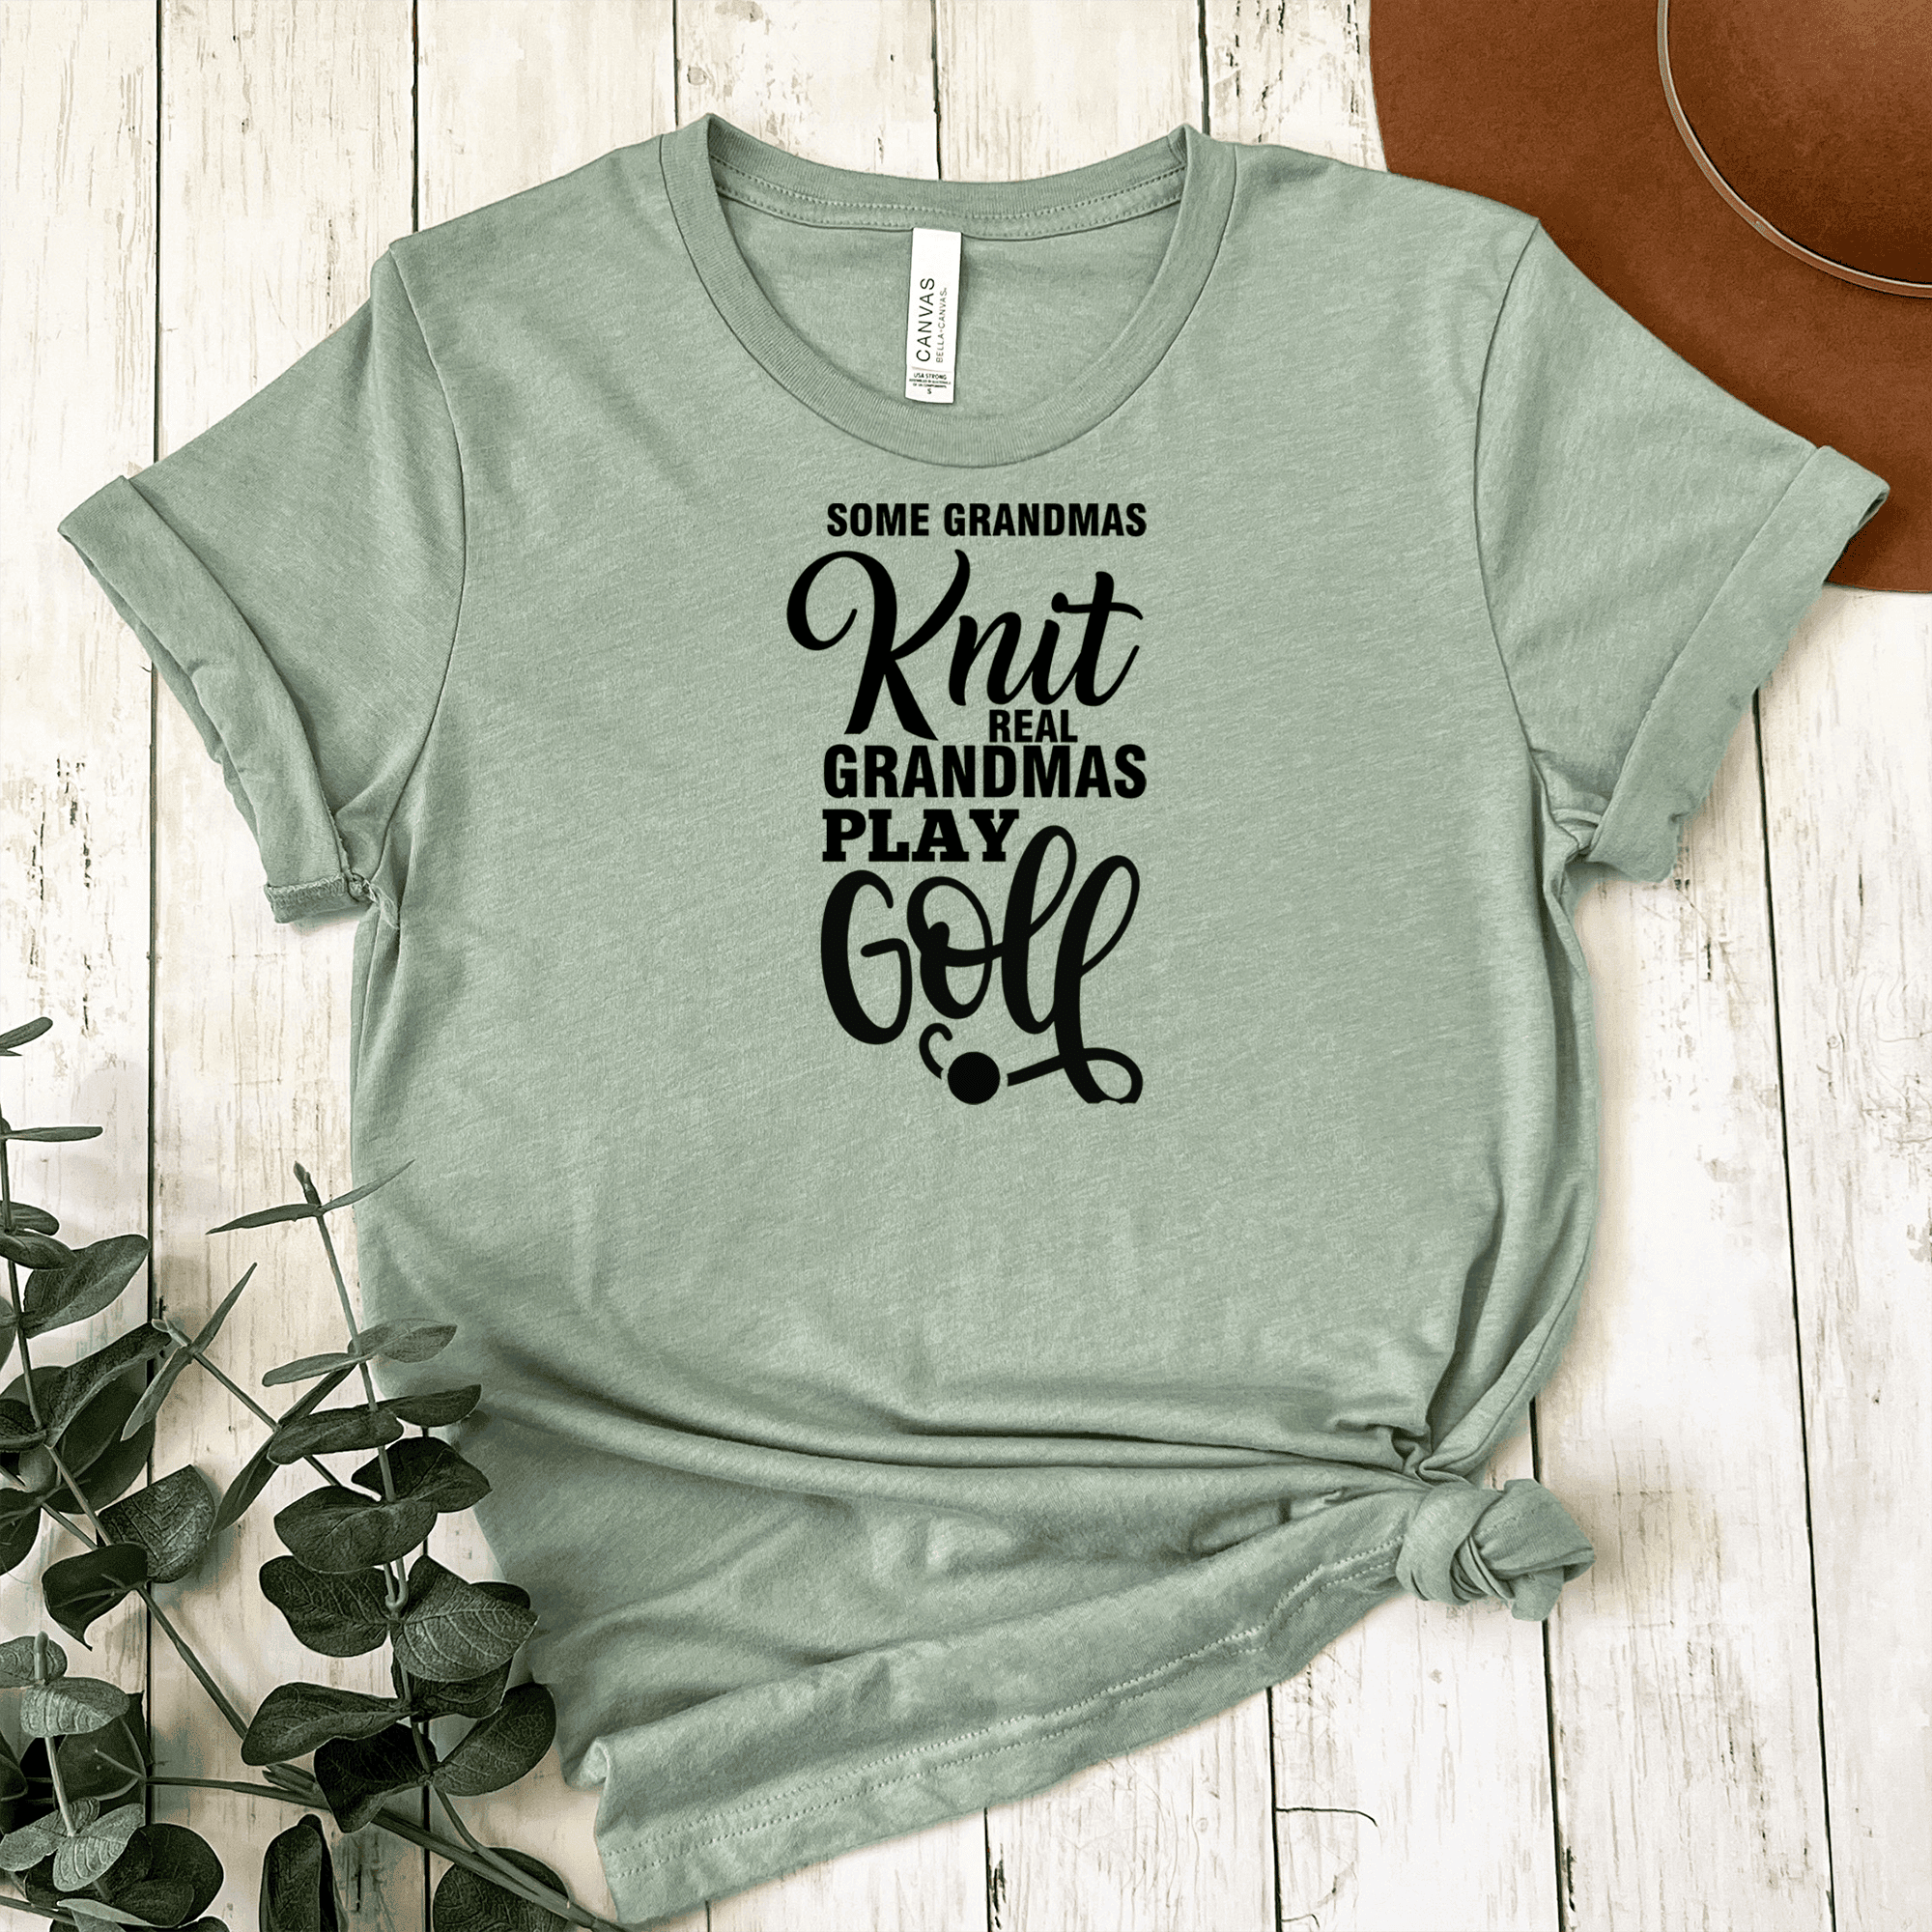 Womens Light Green T Shirt with Real-Ladies-Golf design